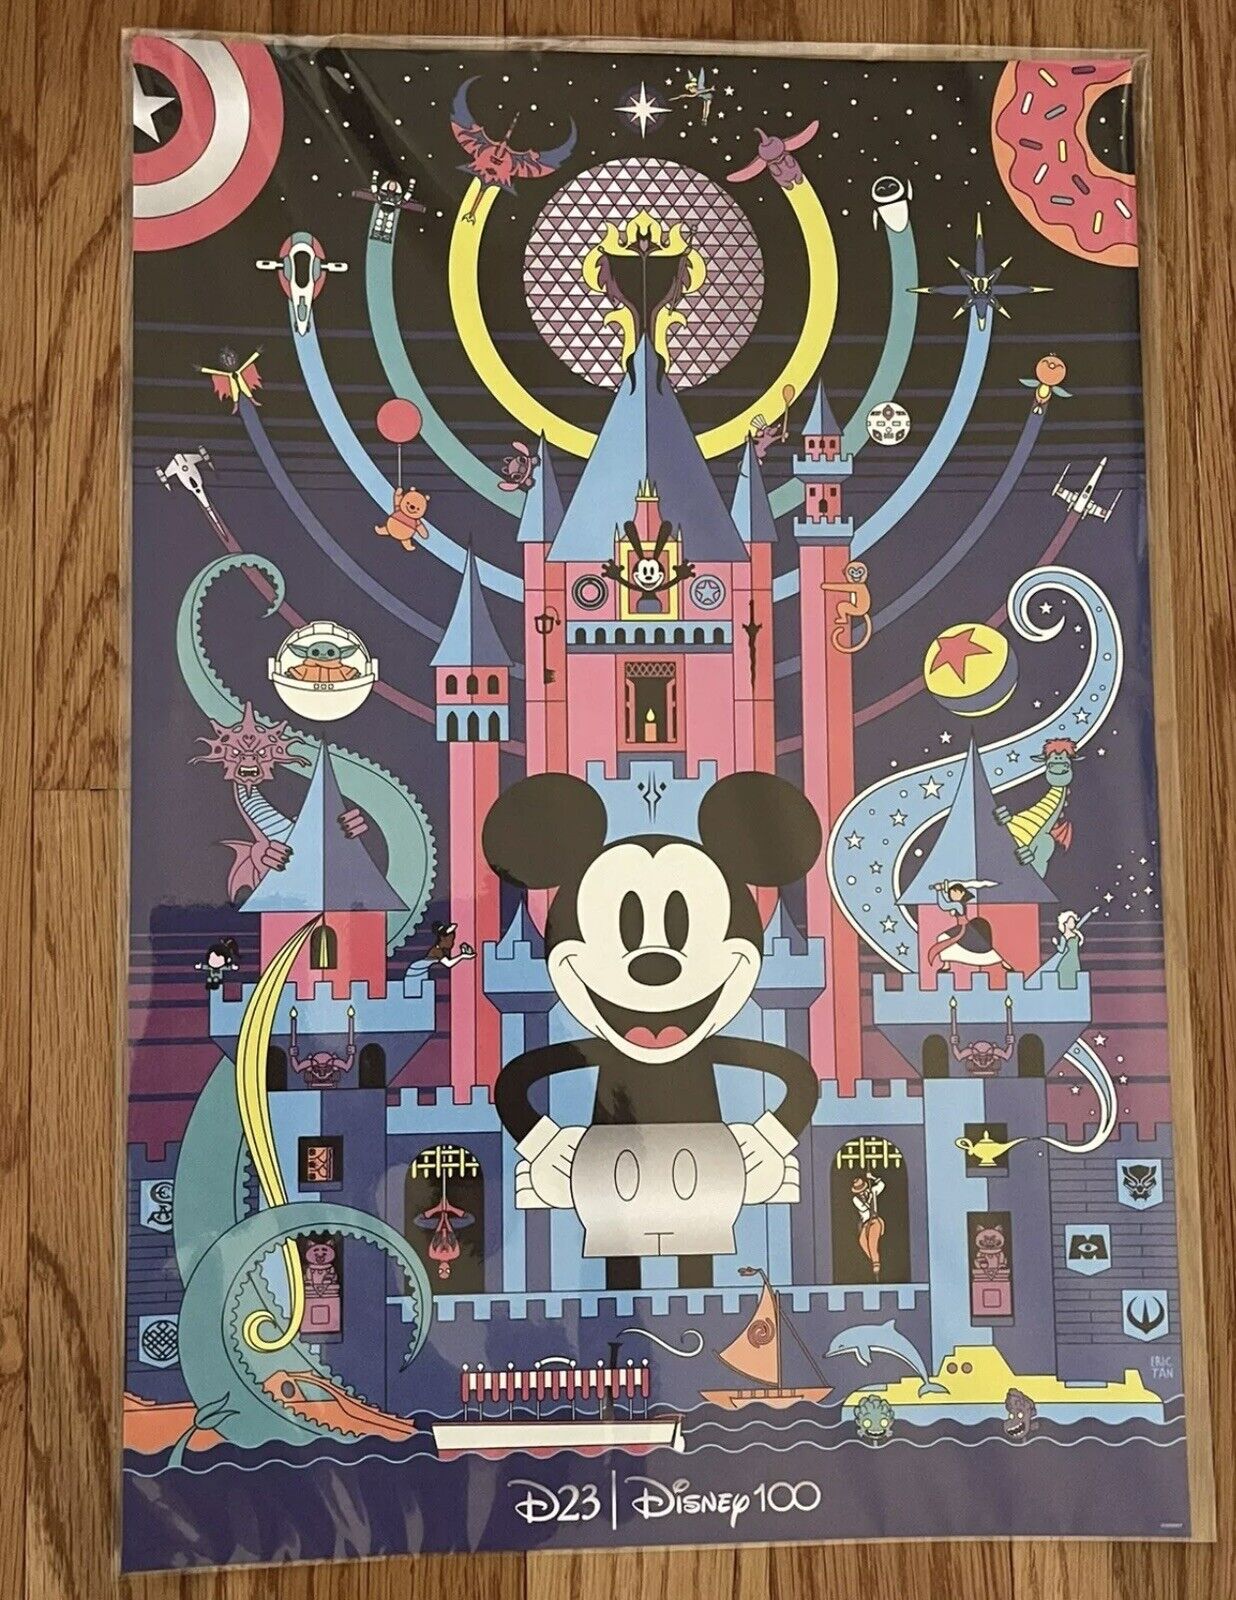 D23 Poster 2022 Expo Gold Member Exclusive Disney Mickey Oswald Star Wars